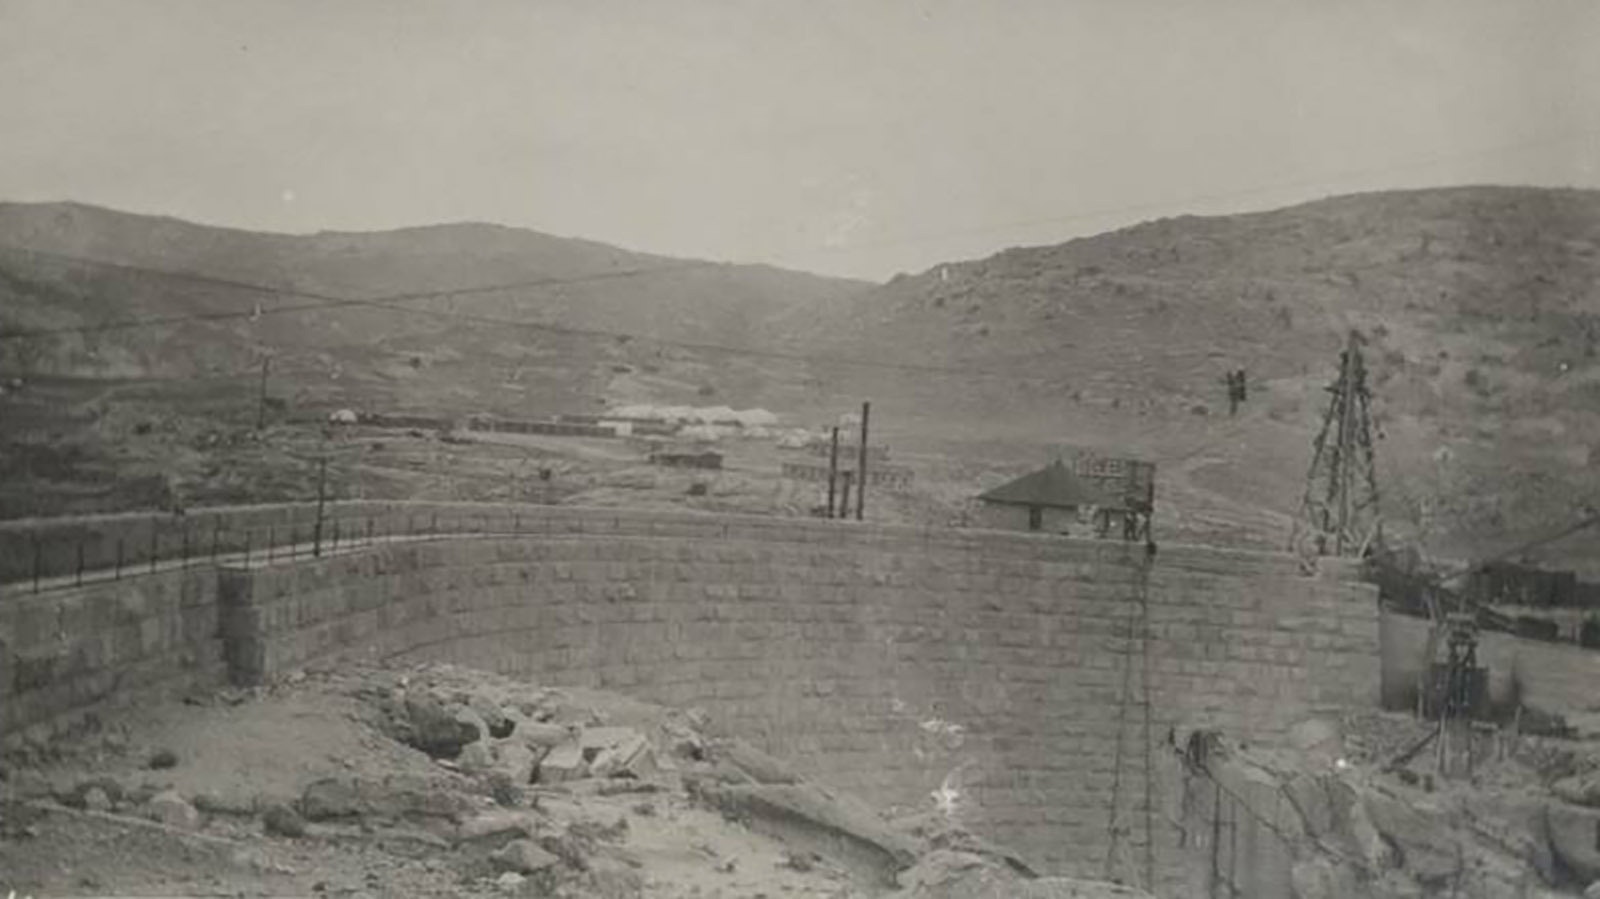 Construction of the Pathfinder Dam on the North Platte River southwest of Casper. It was completed in 1909.